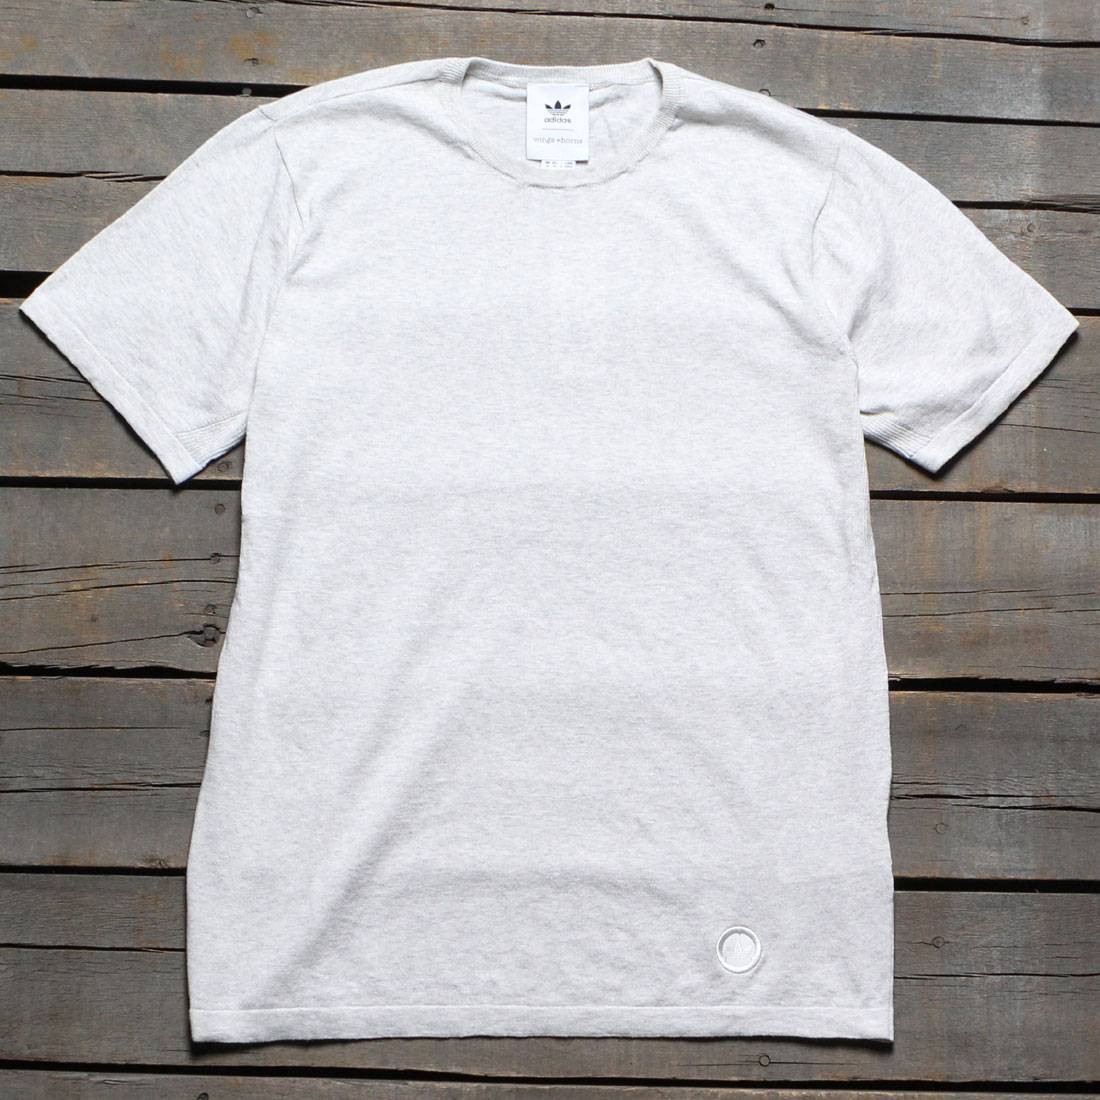 Adidas Consortium x Wings And Horns Men Knit Tee white off white